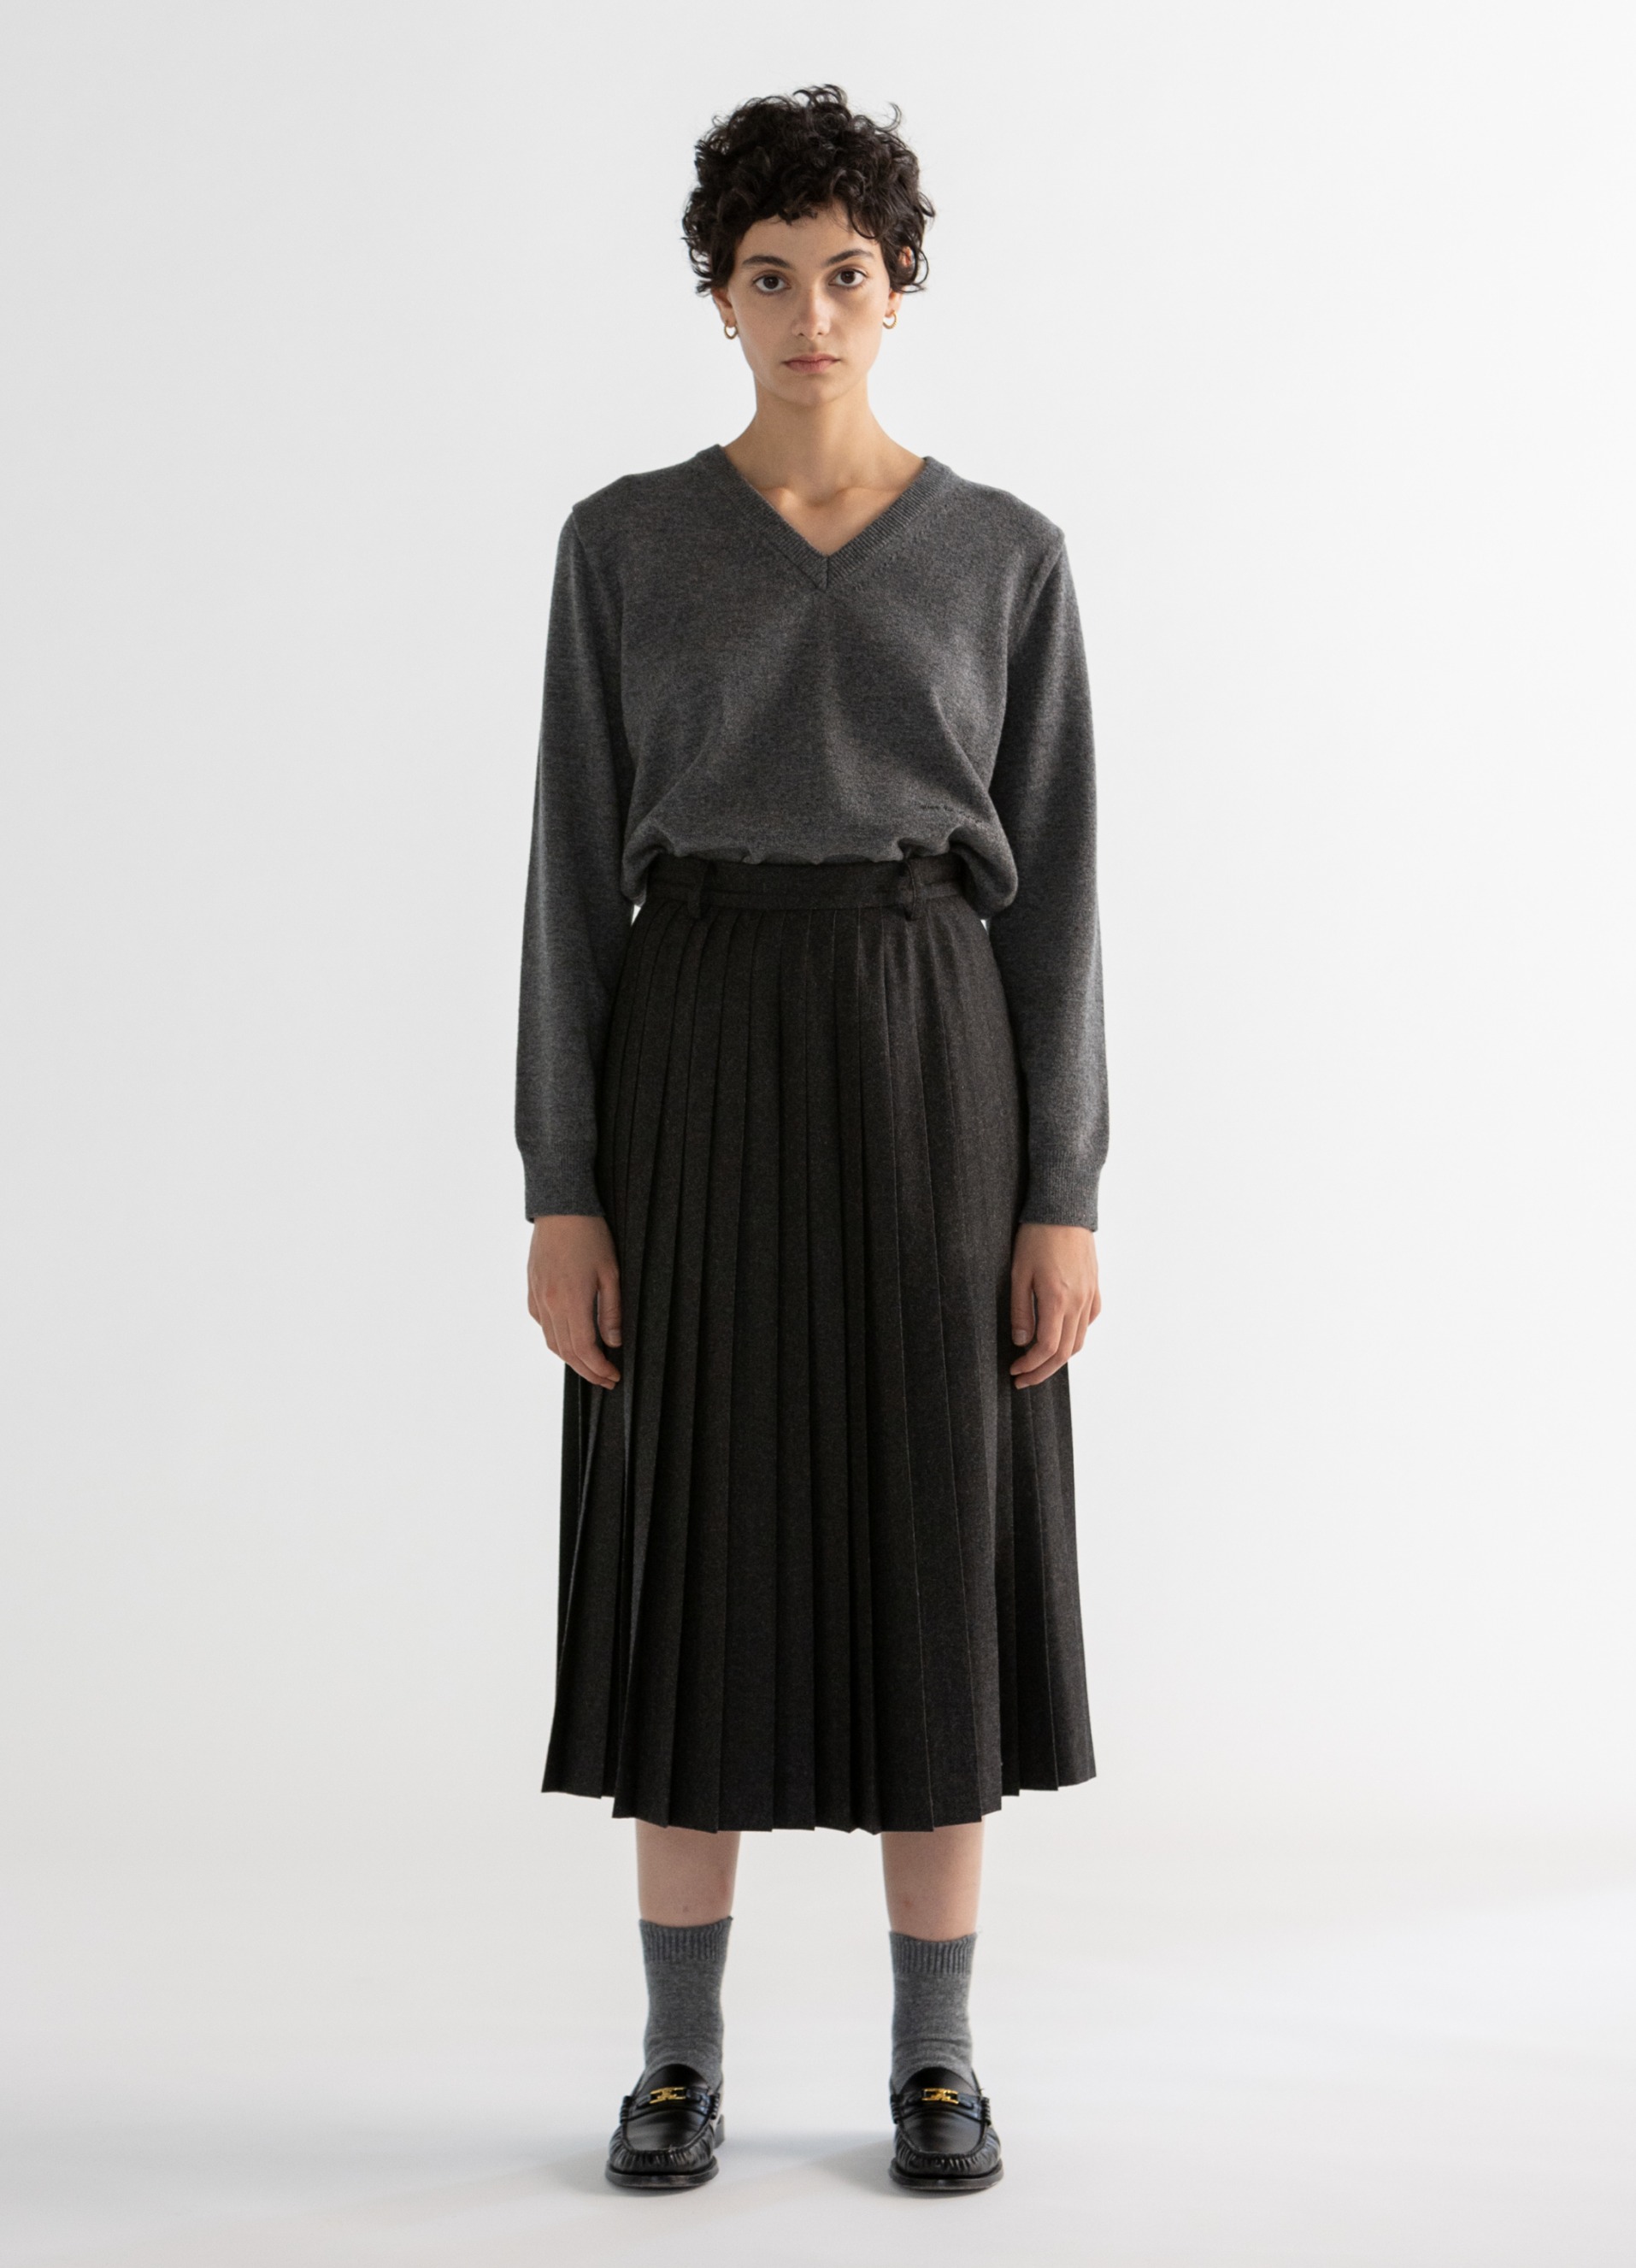 Lodovico Pleated Skirt (Charcoal) Out of Stock